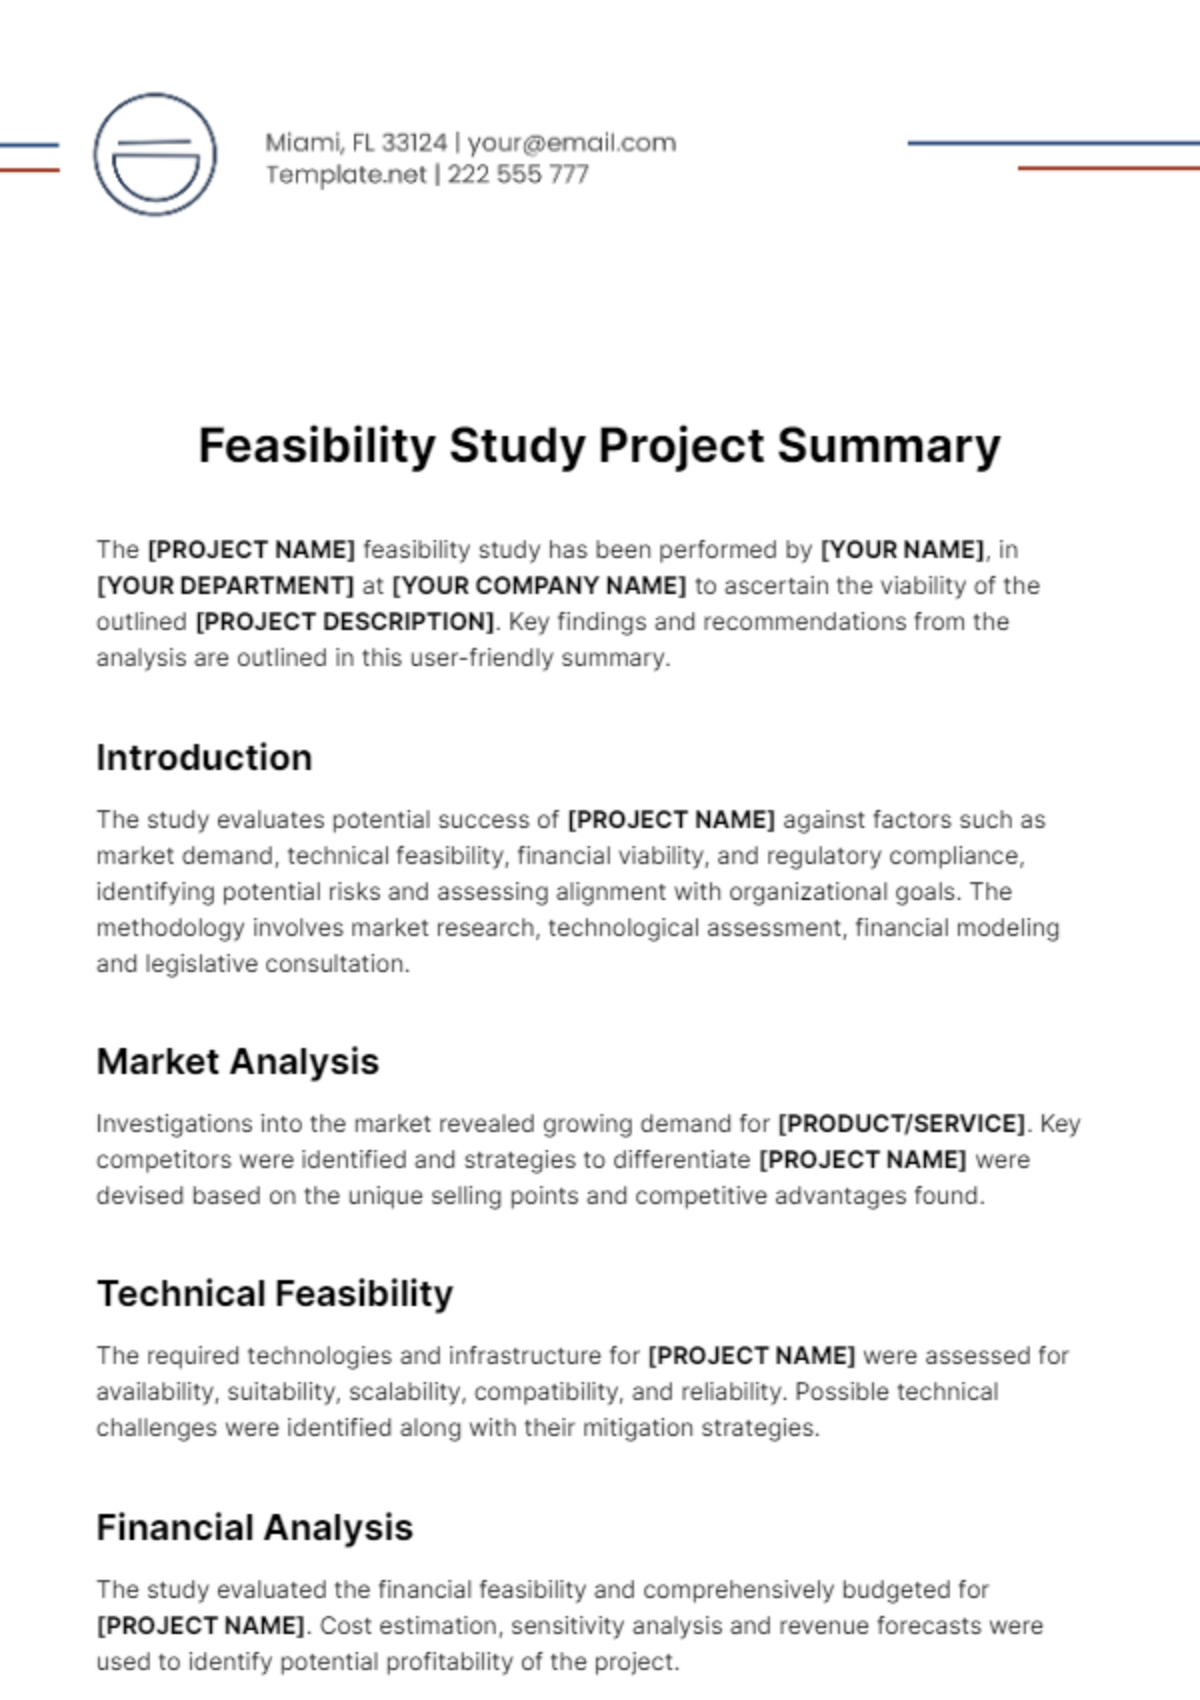 Feasibility Study Project Summary Template